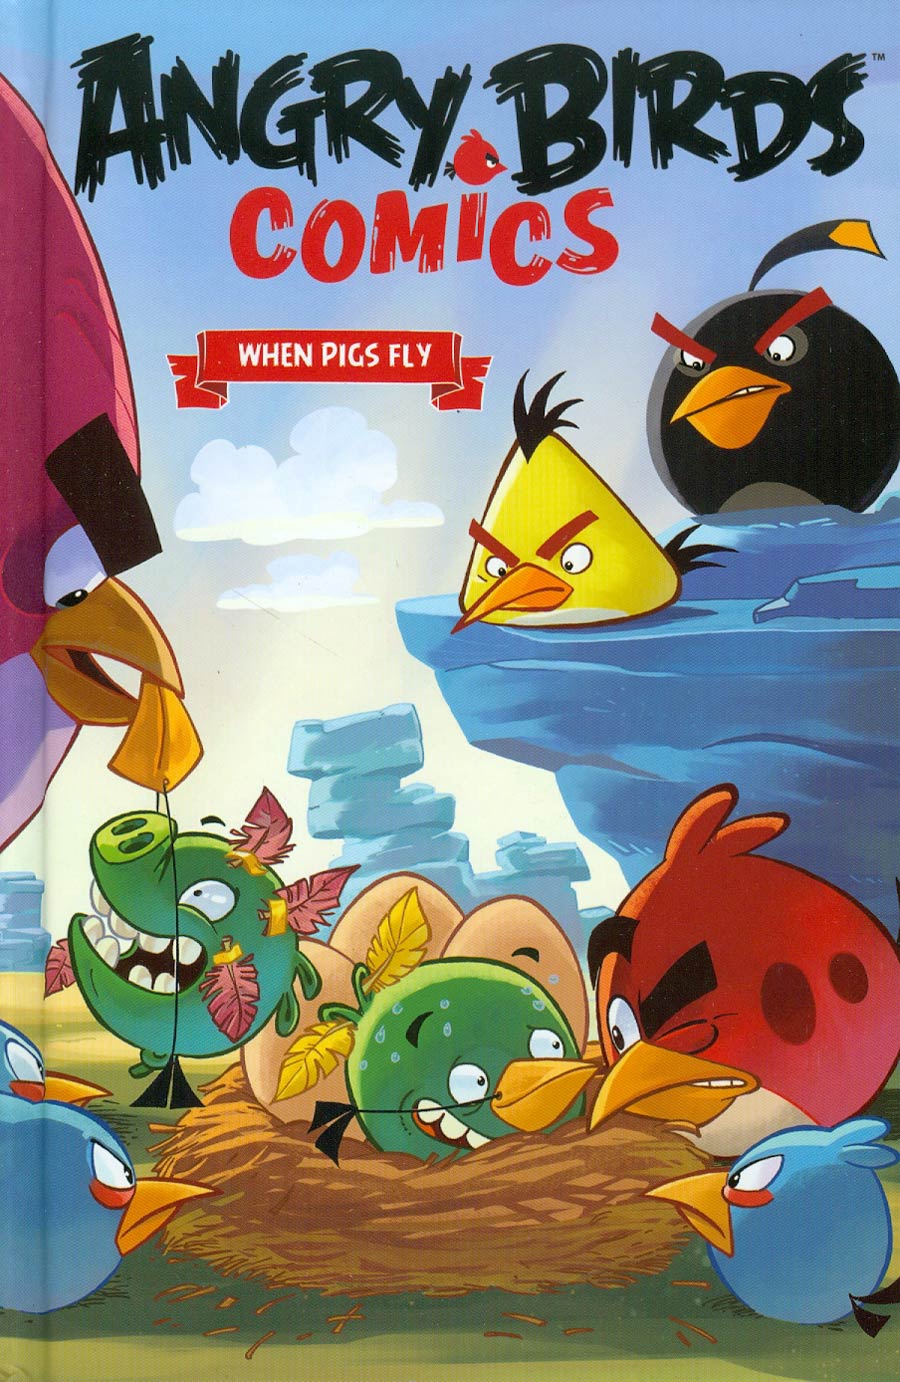 Angry Birds Comics Vol 2 When Pigs Fly HC